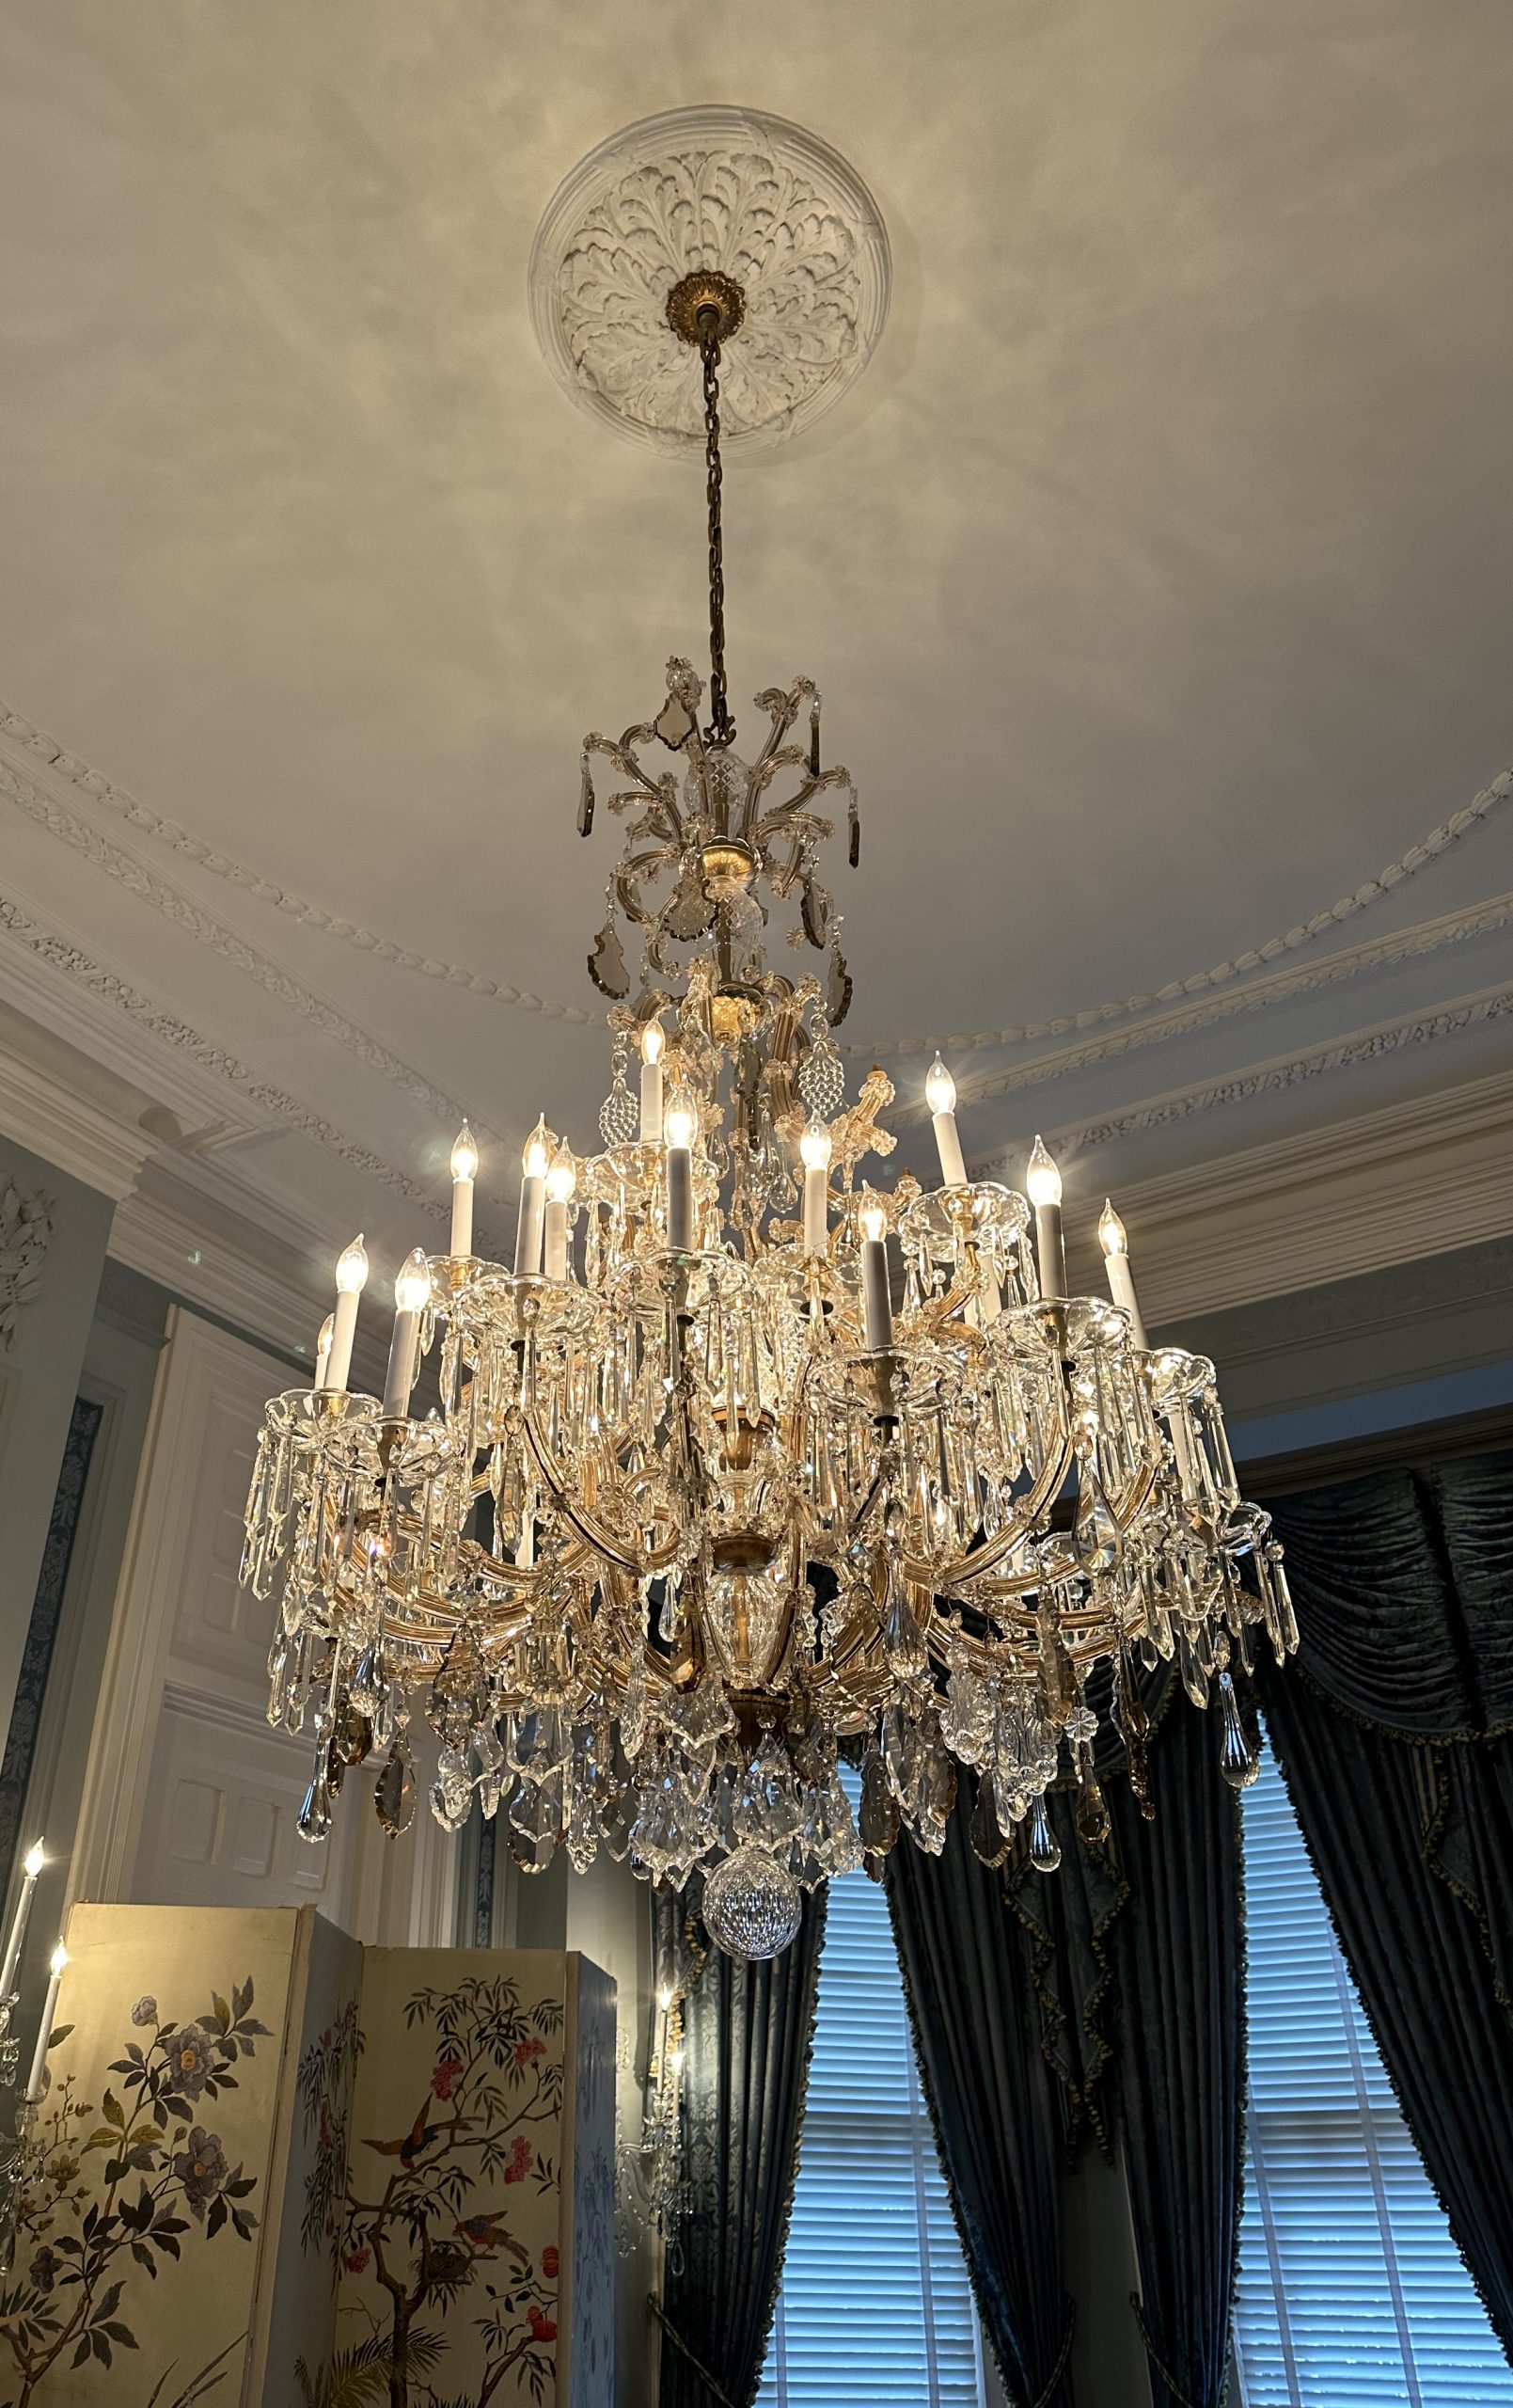 North Carolina Executive Mansion and dining room chandelier